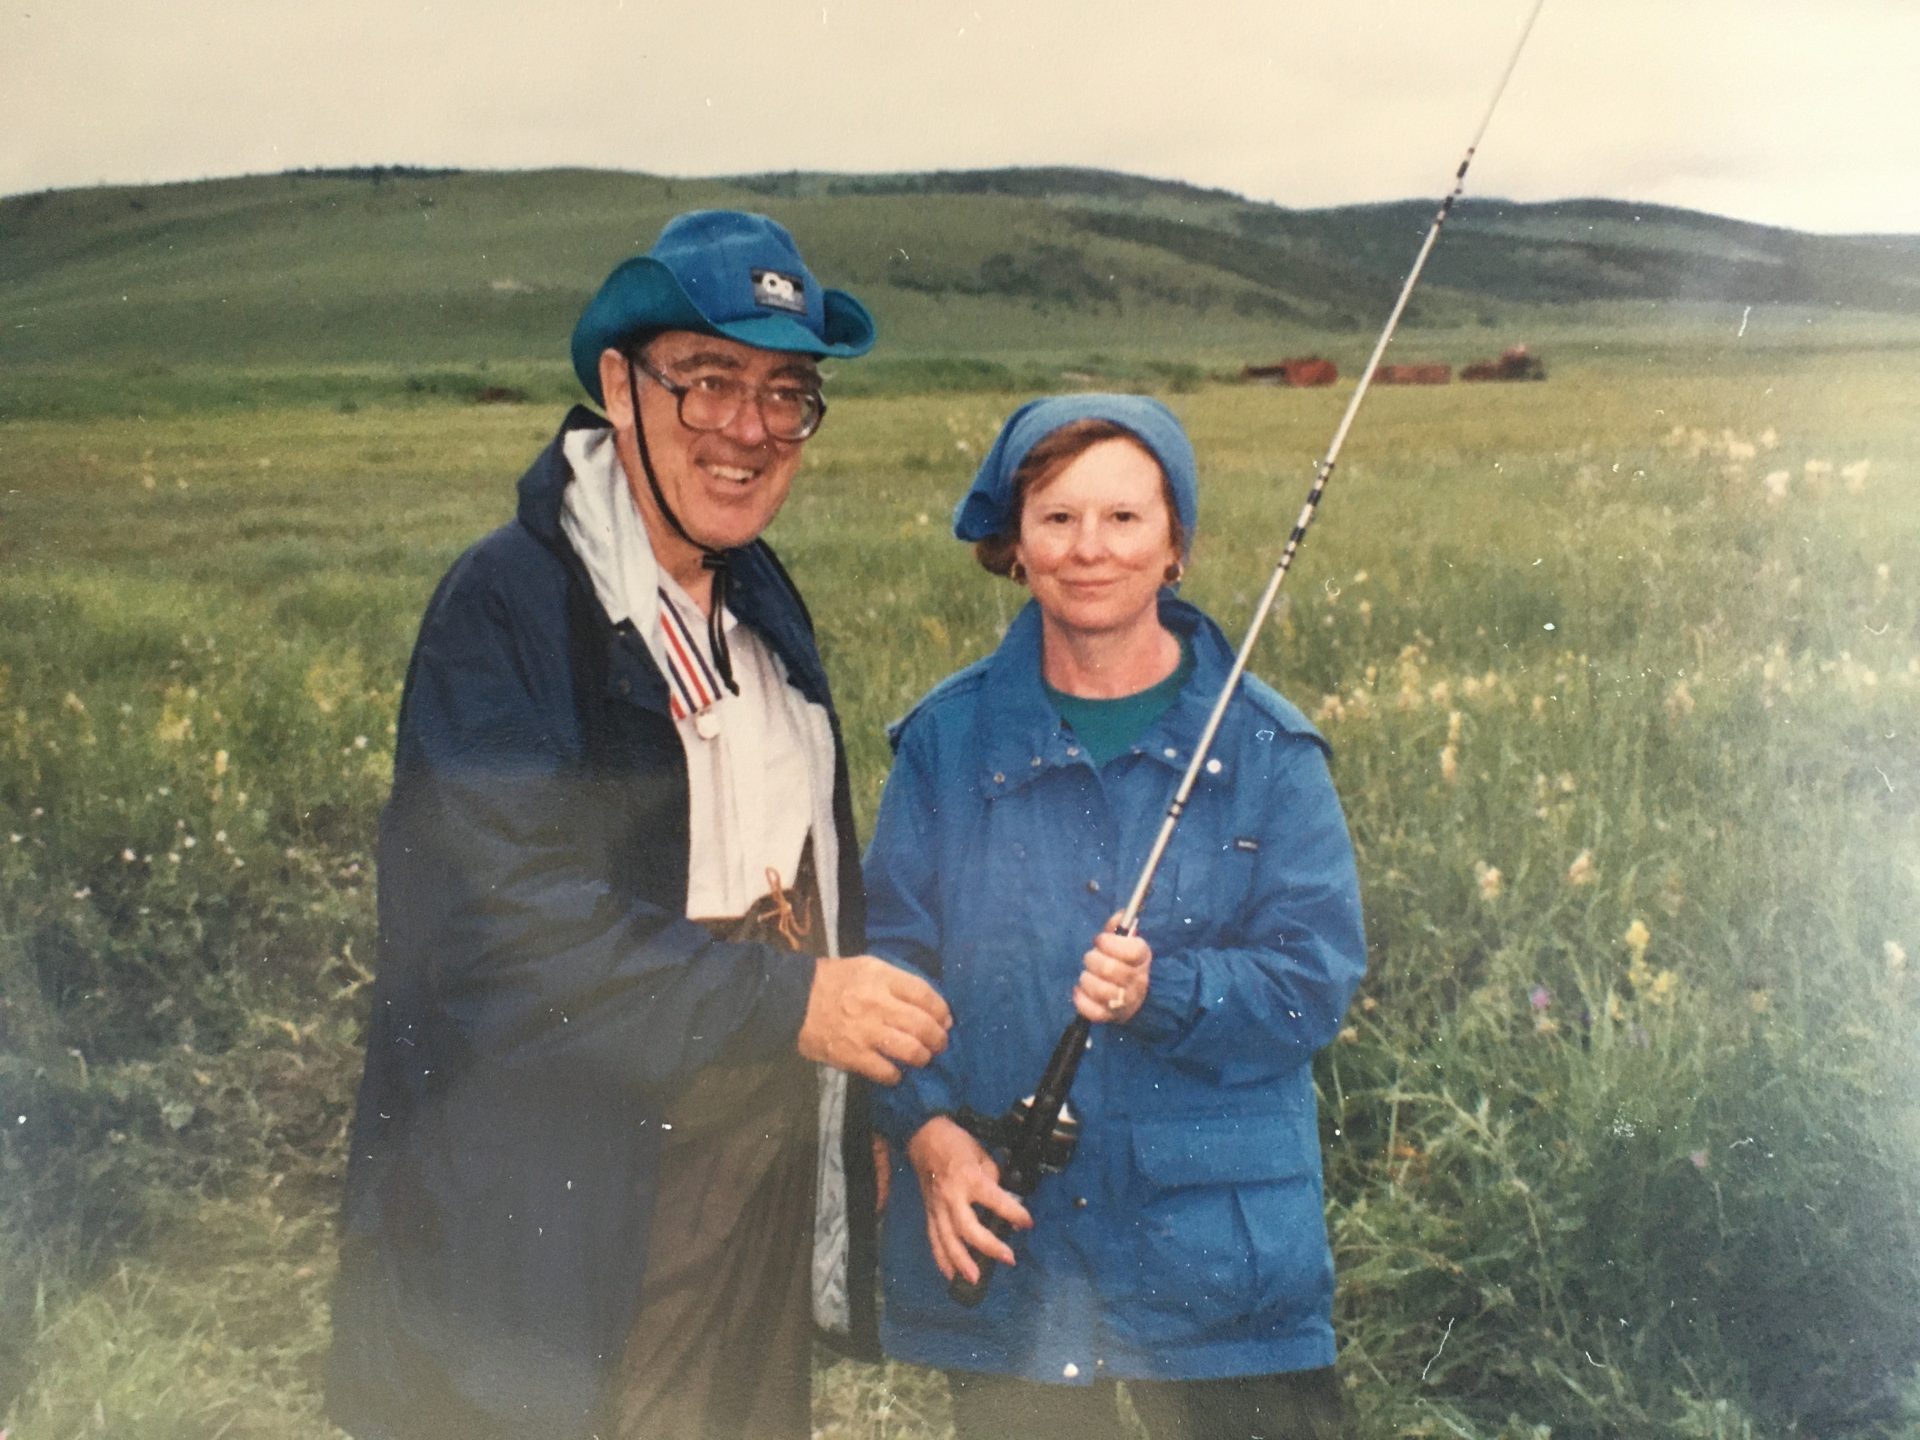 Dick and Thelma fishing in Mongoloa, July 1990